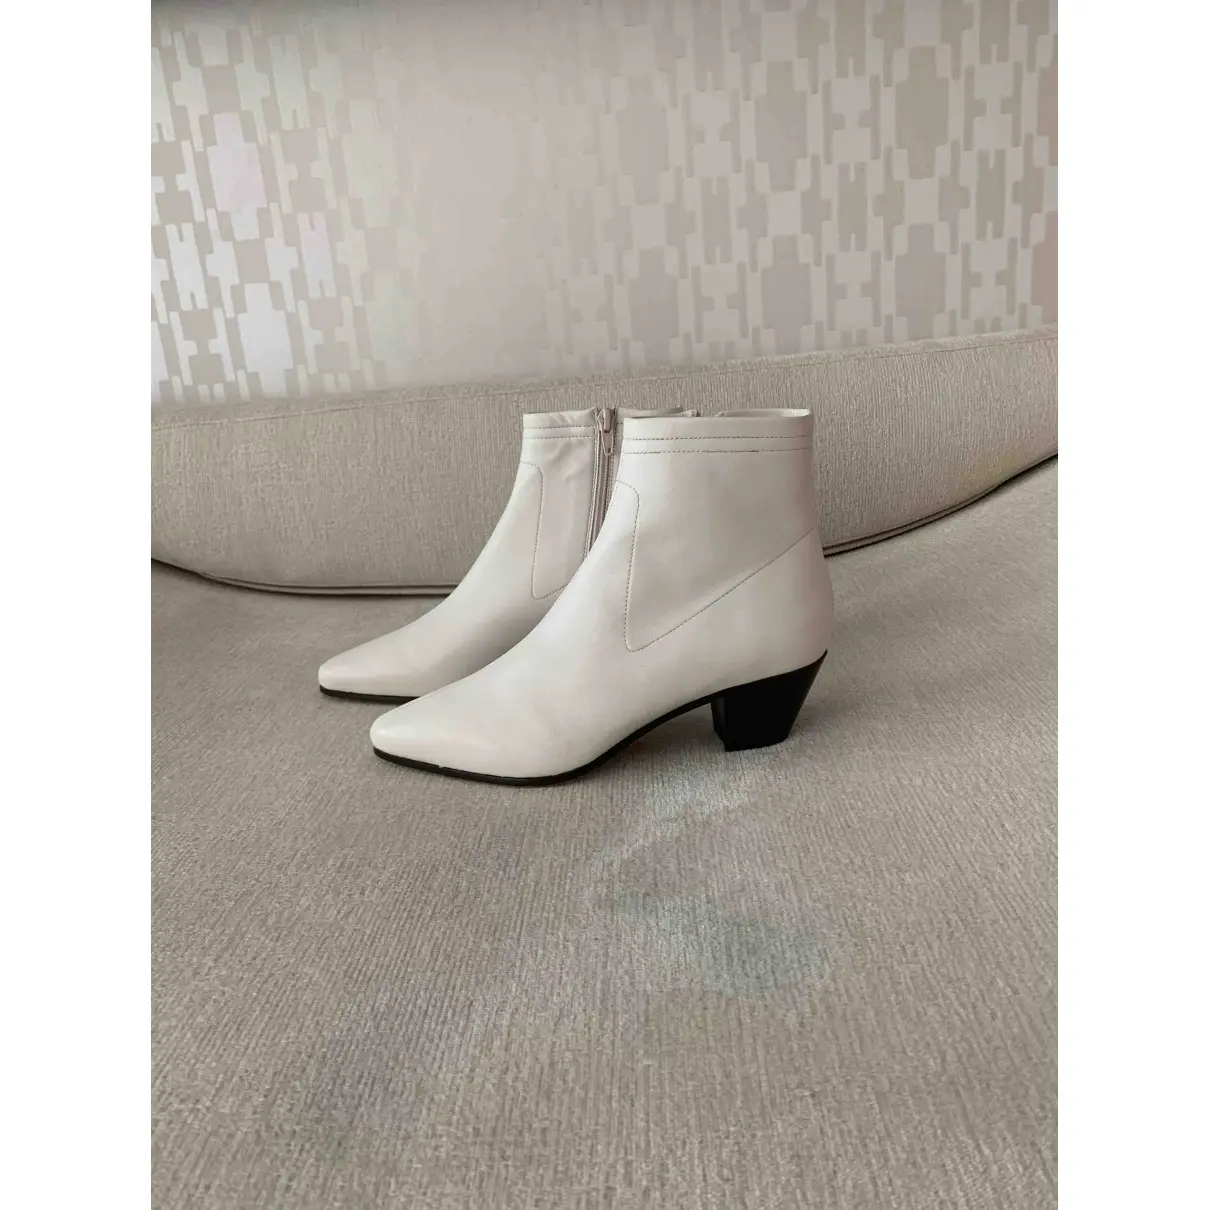 Buy Maje Spring Summer 2020 leather ankle boots online